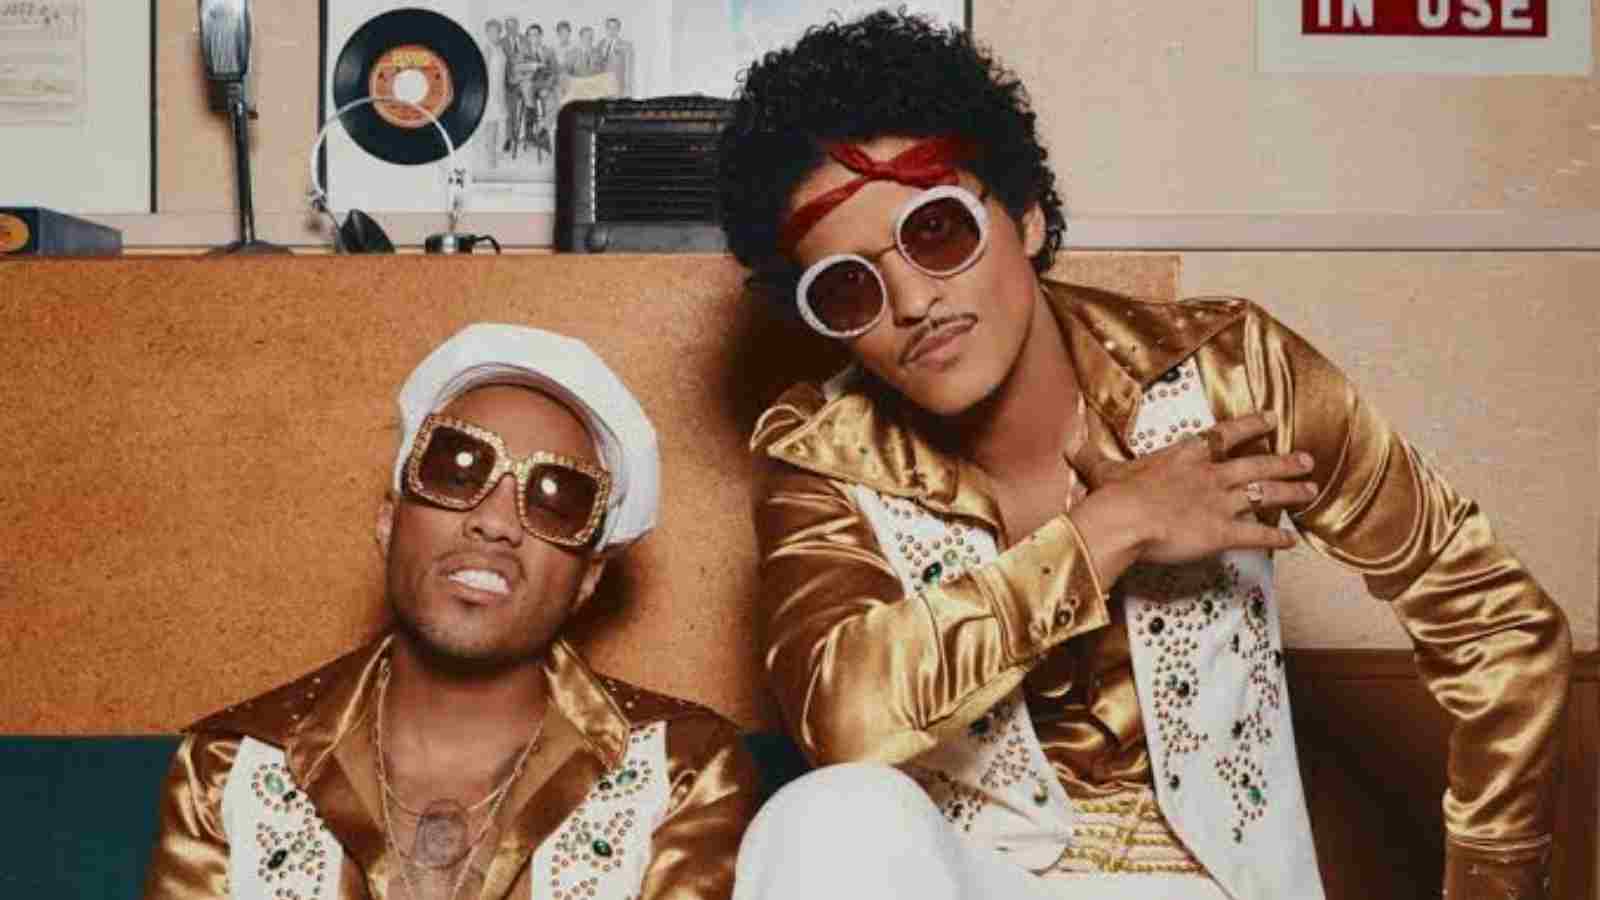 The Silk Sonic duo Bruno Mars and Anderson. Paak